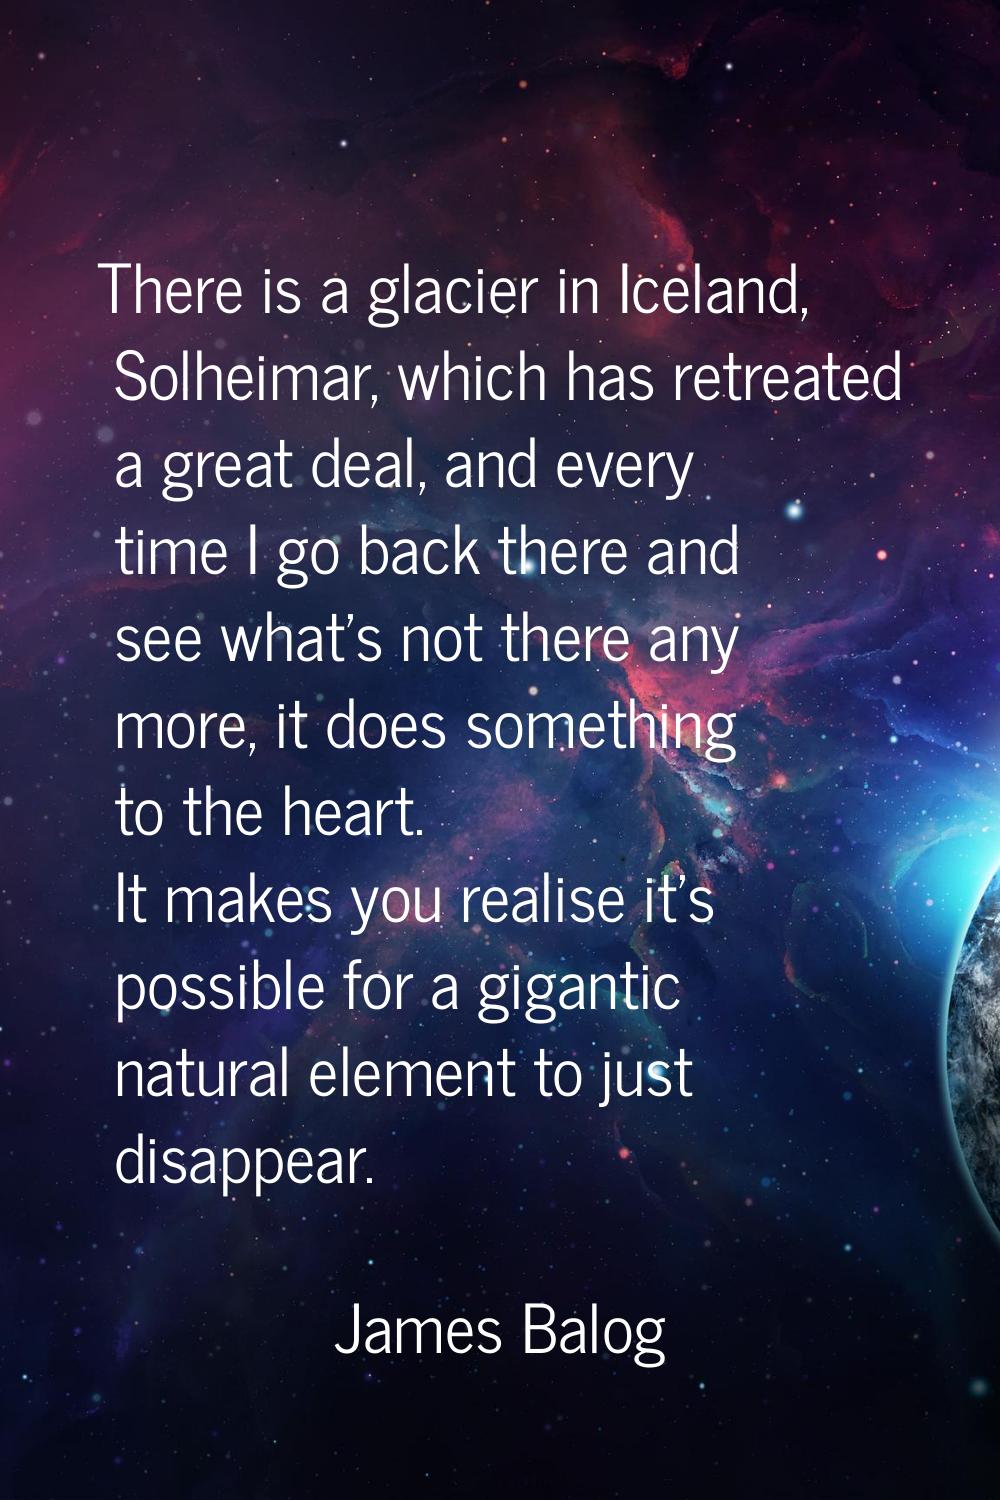 There is a glacier in Iceland, Solheimar, which has retreated a great deal, and every time I go bac